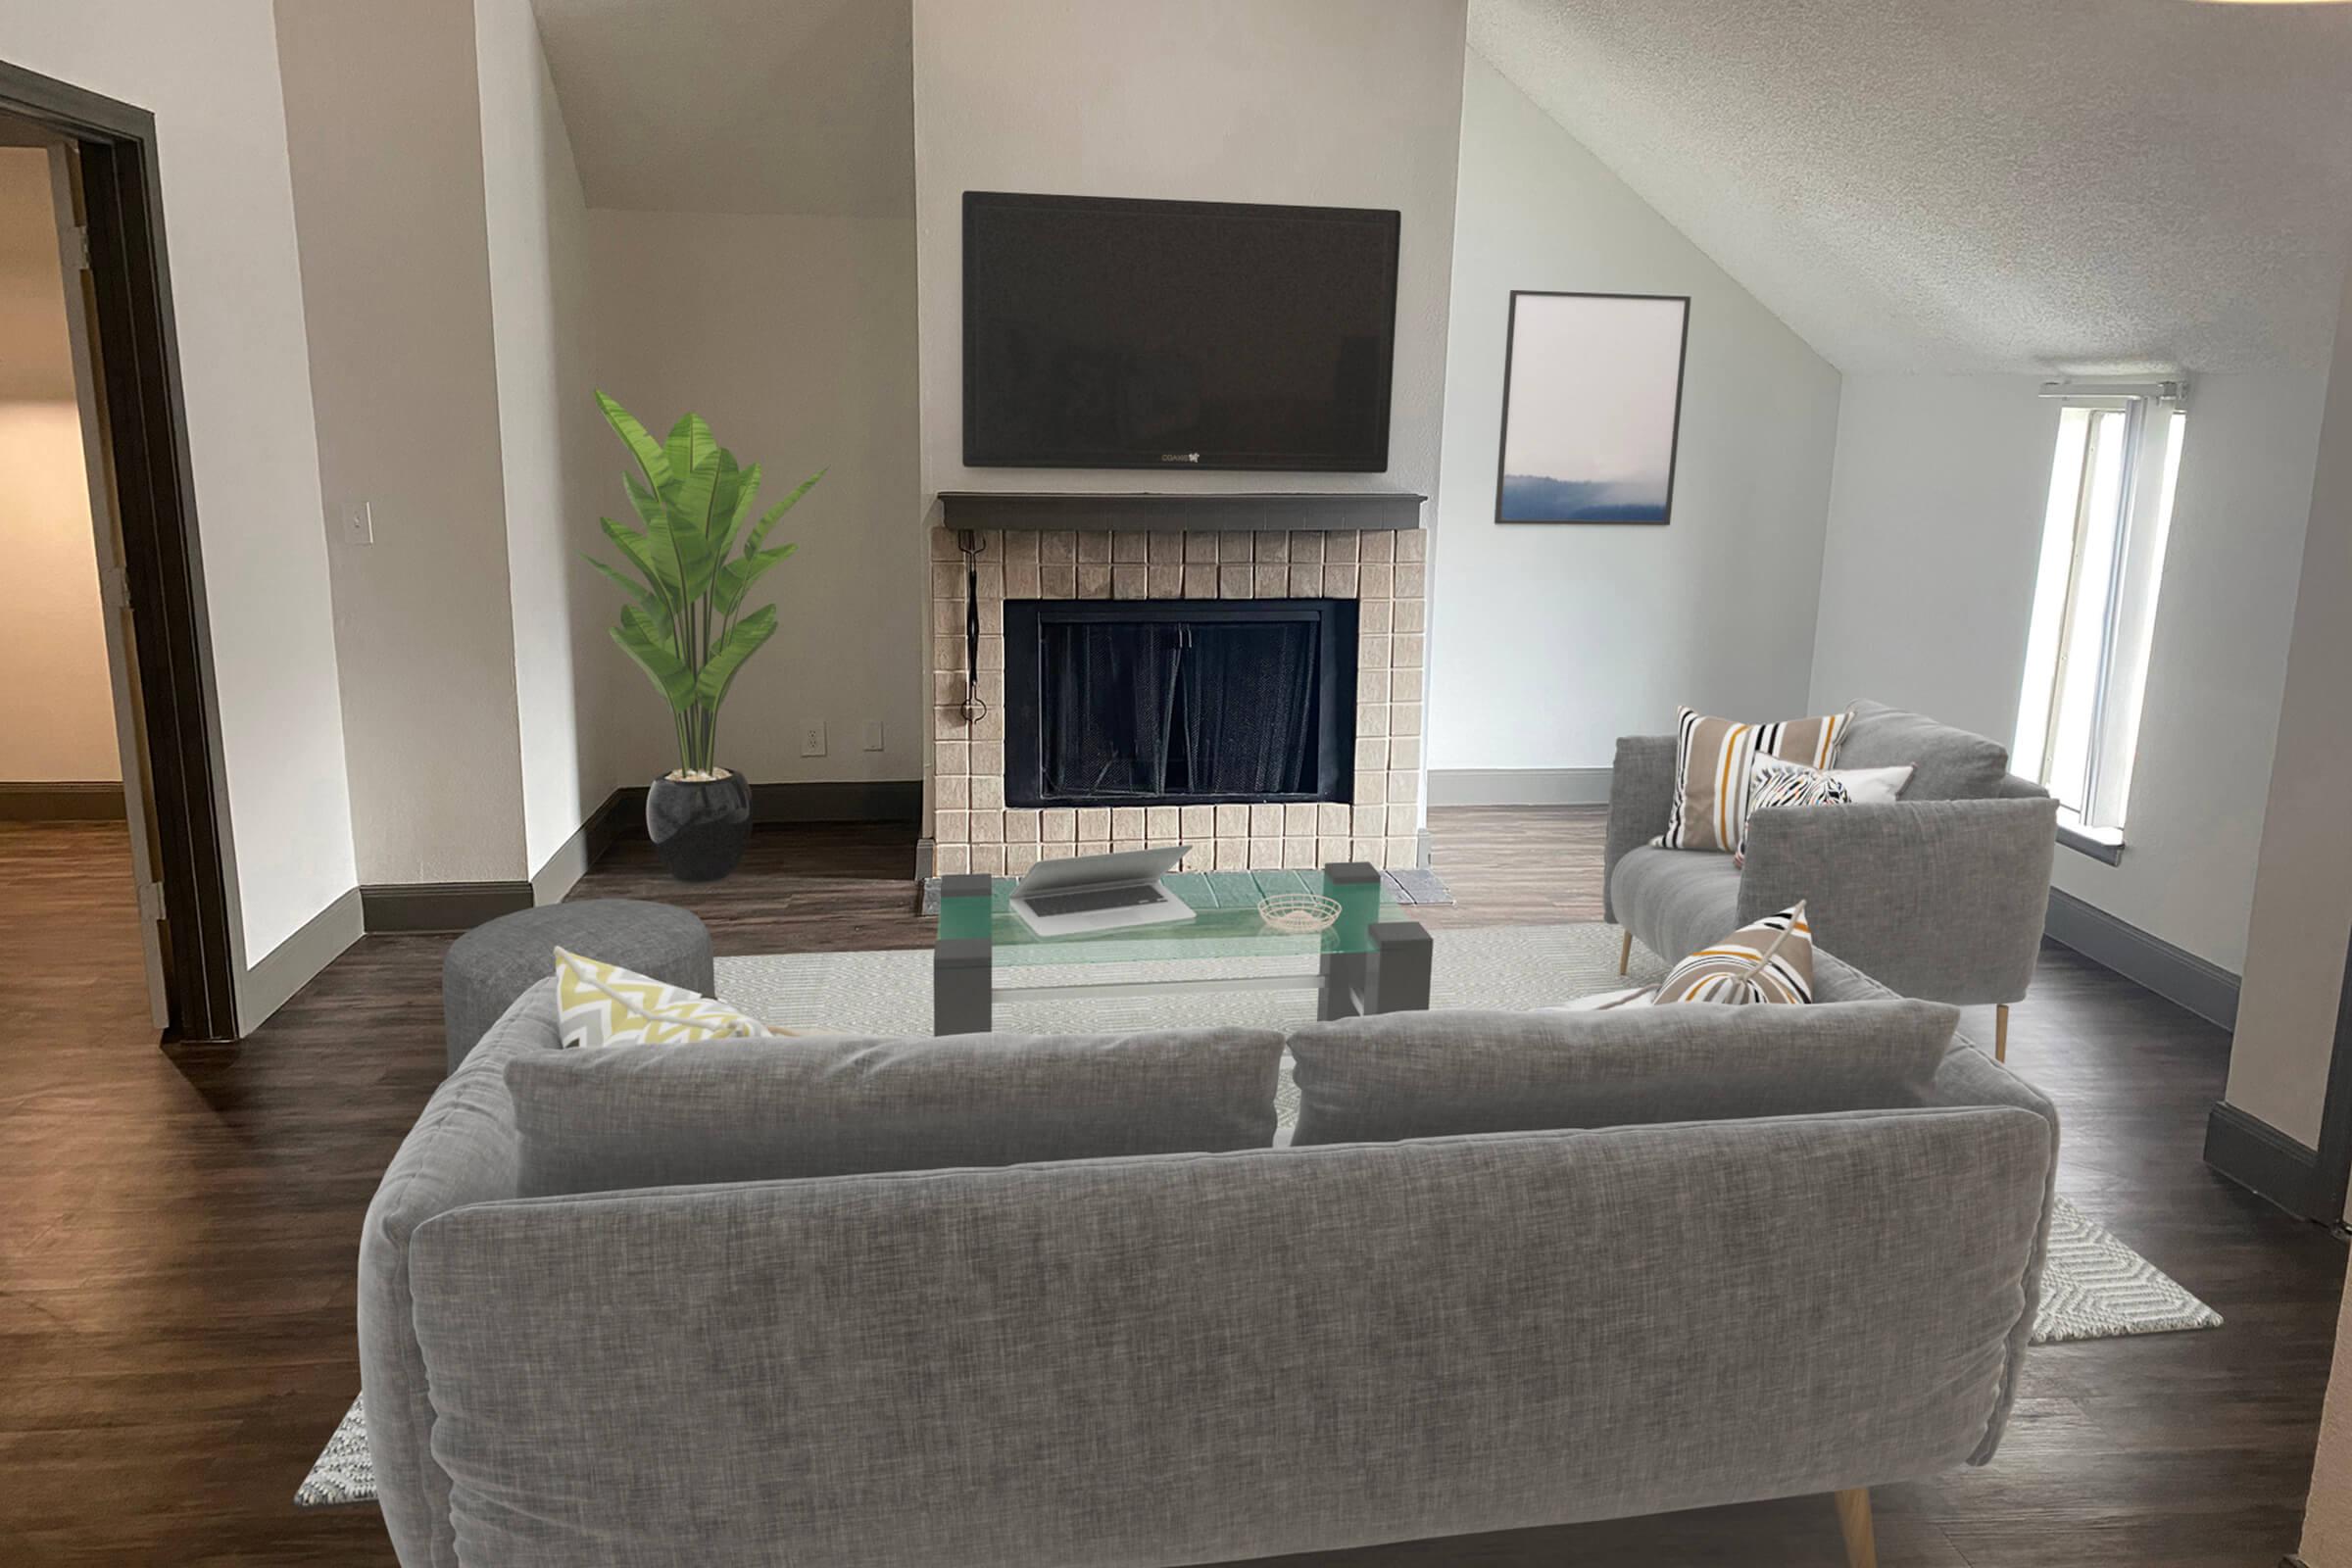 GAS FIREPLACES IN SELECT APARTMENT HOMES